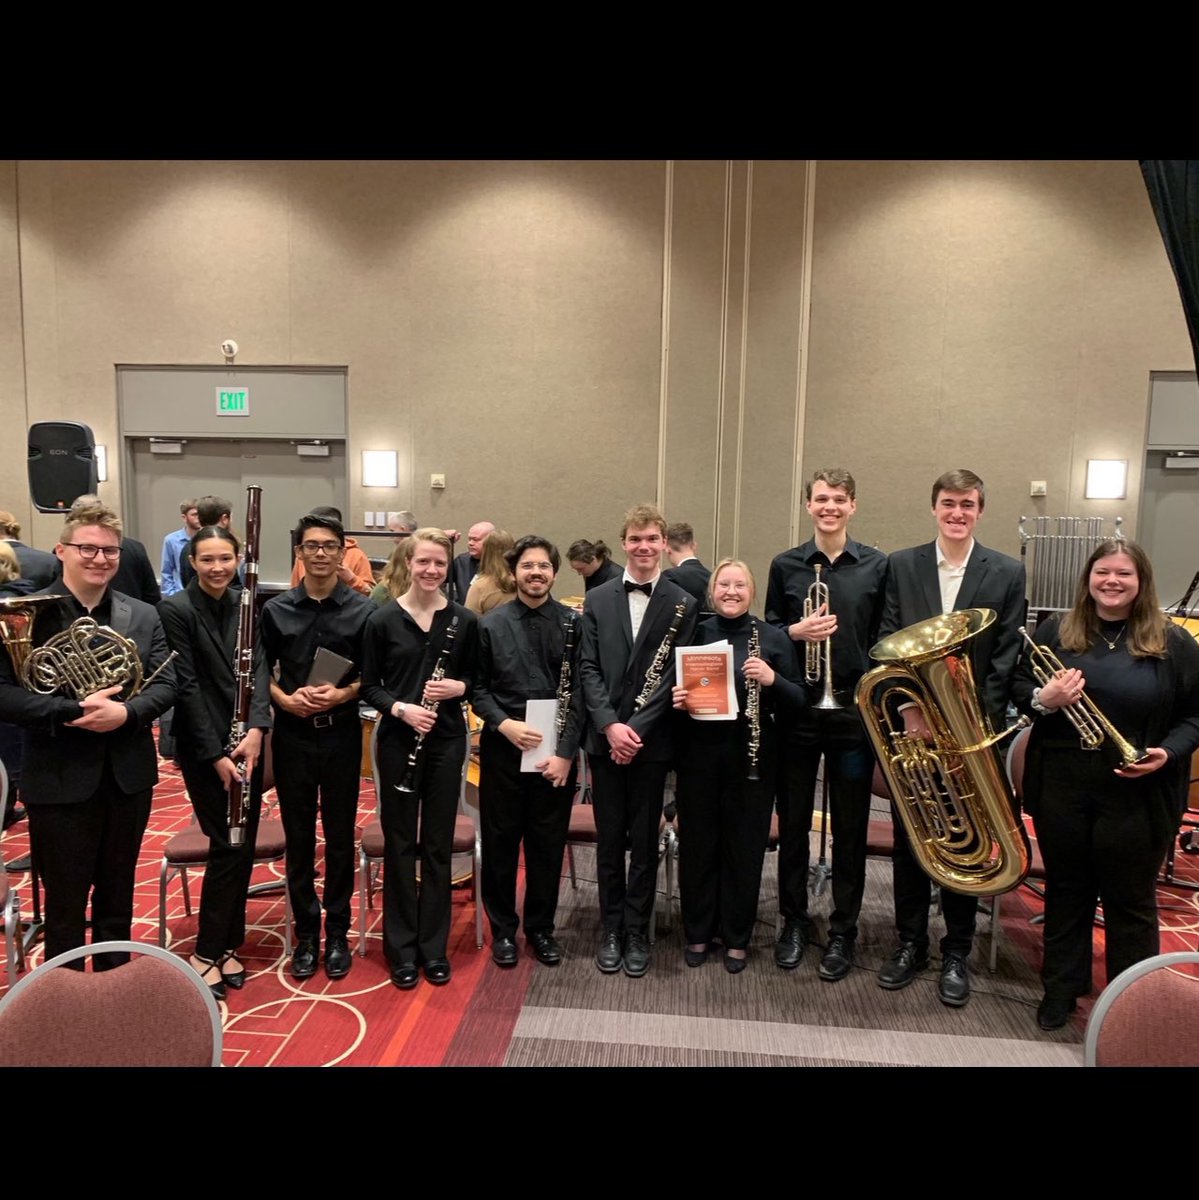 We're heading to the annual @MnMusicEd Midwinter Convention, Feb. 15 - 17! Who'll be there with us? Read more about the SoM's involvement this year, and don't forget to stop by our booth and say hi! z.umn.edu/9auq